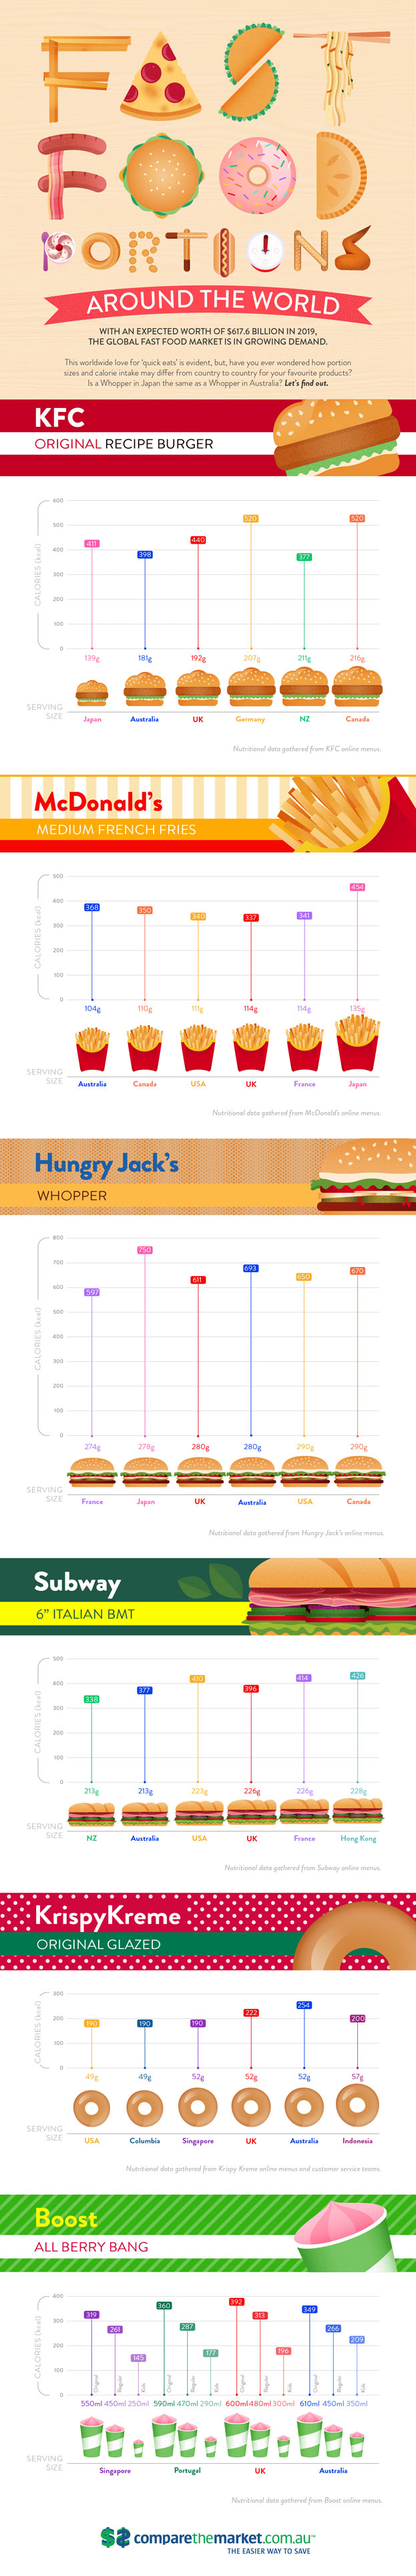 Fast-Food-Portions-Around-The-World